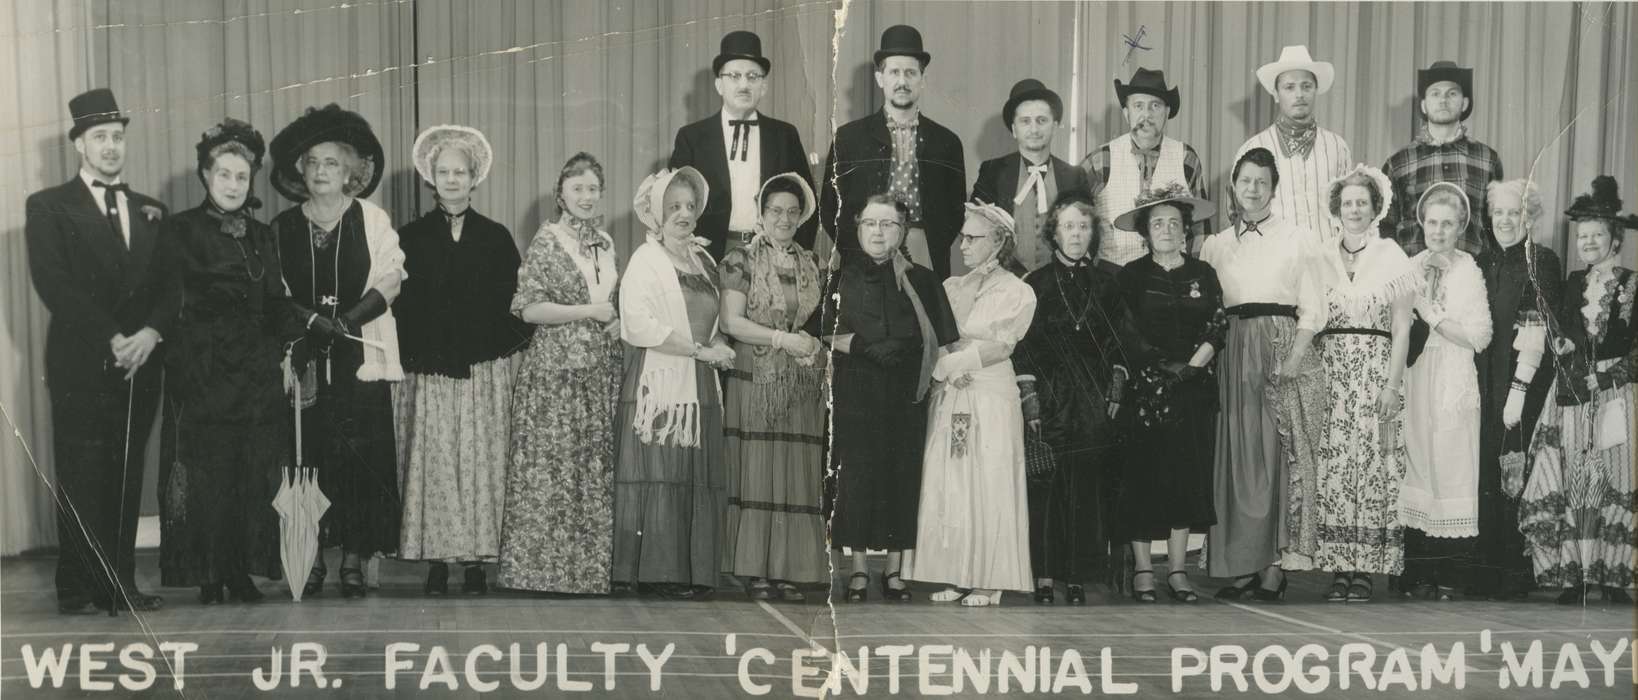 umbrella, Iowa History, Rossiter, Lynn, Schools and Education, Entertainment, performance, Portraits - Group, history of Iowa, stage, play, cowboy hat, Sioux City, IA, Iowa